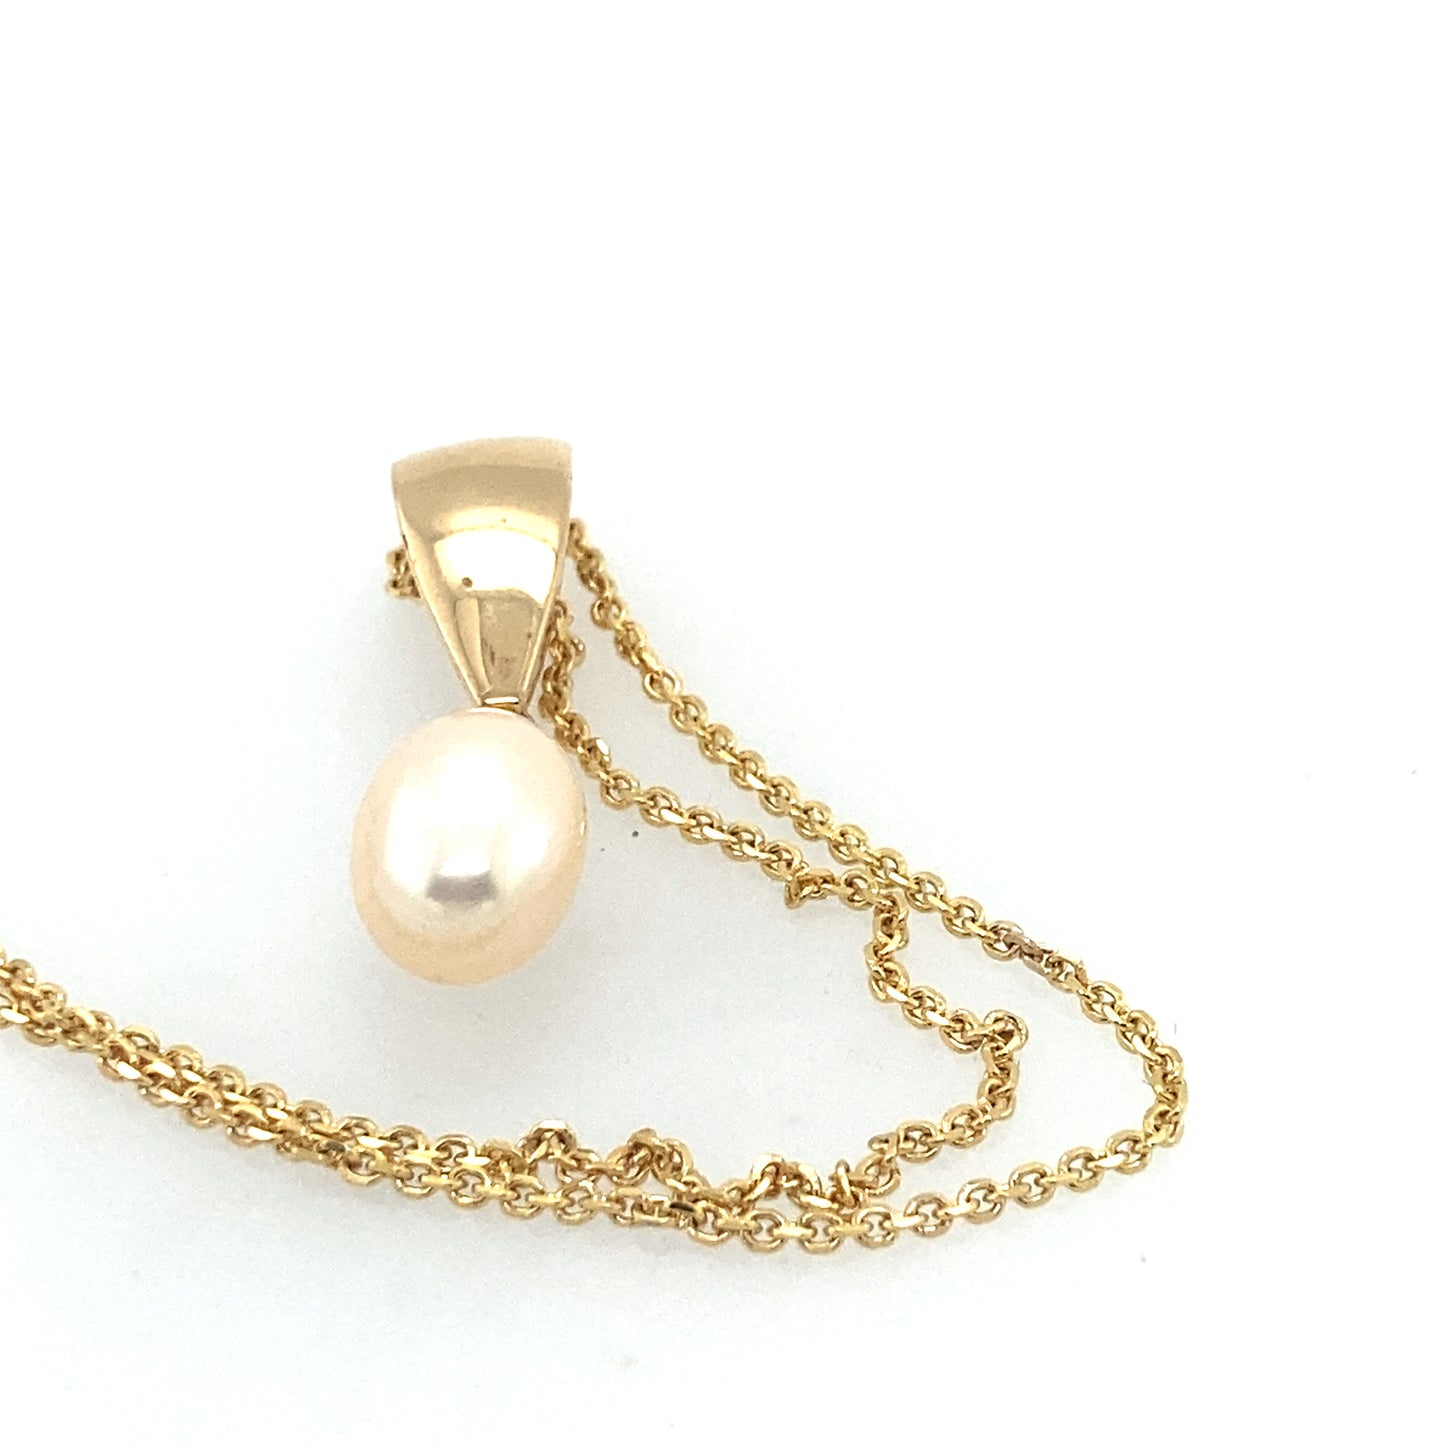 14k yellow fold fresh water 14mm pearl pendant with 14k yellow gold 20 inch chain.